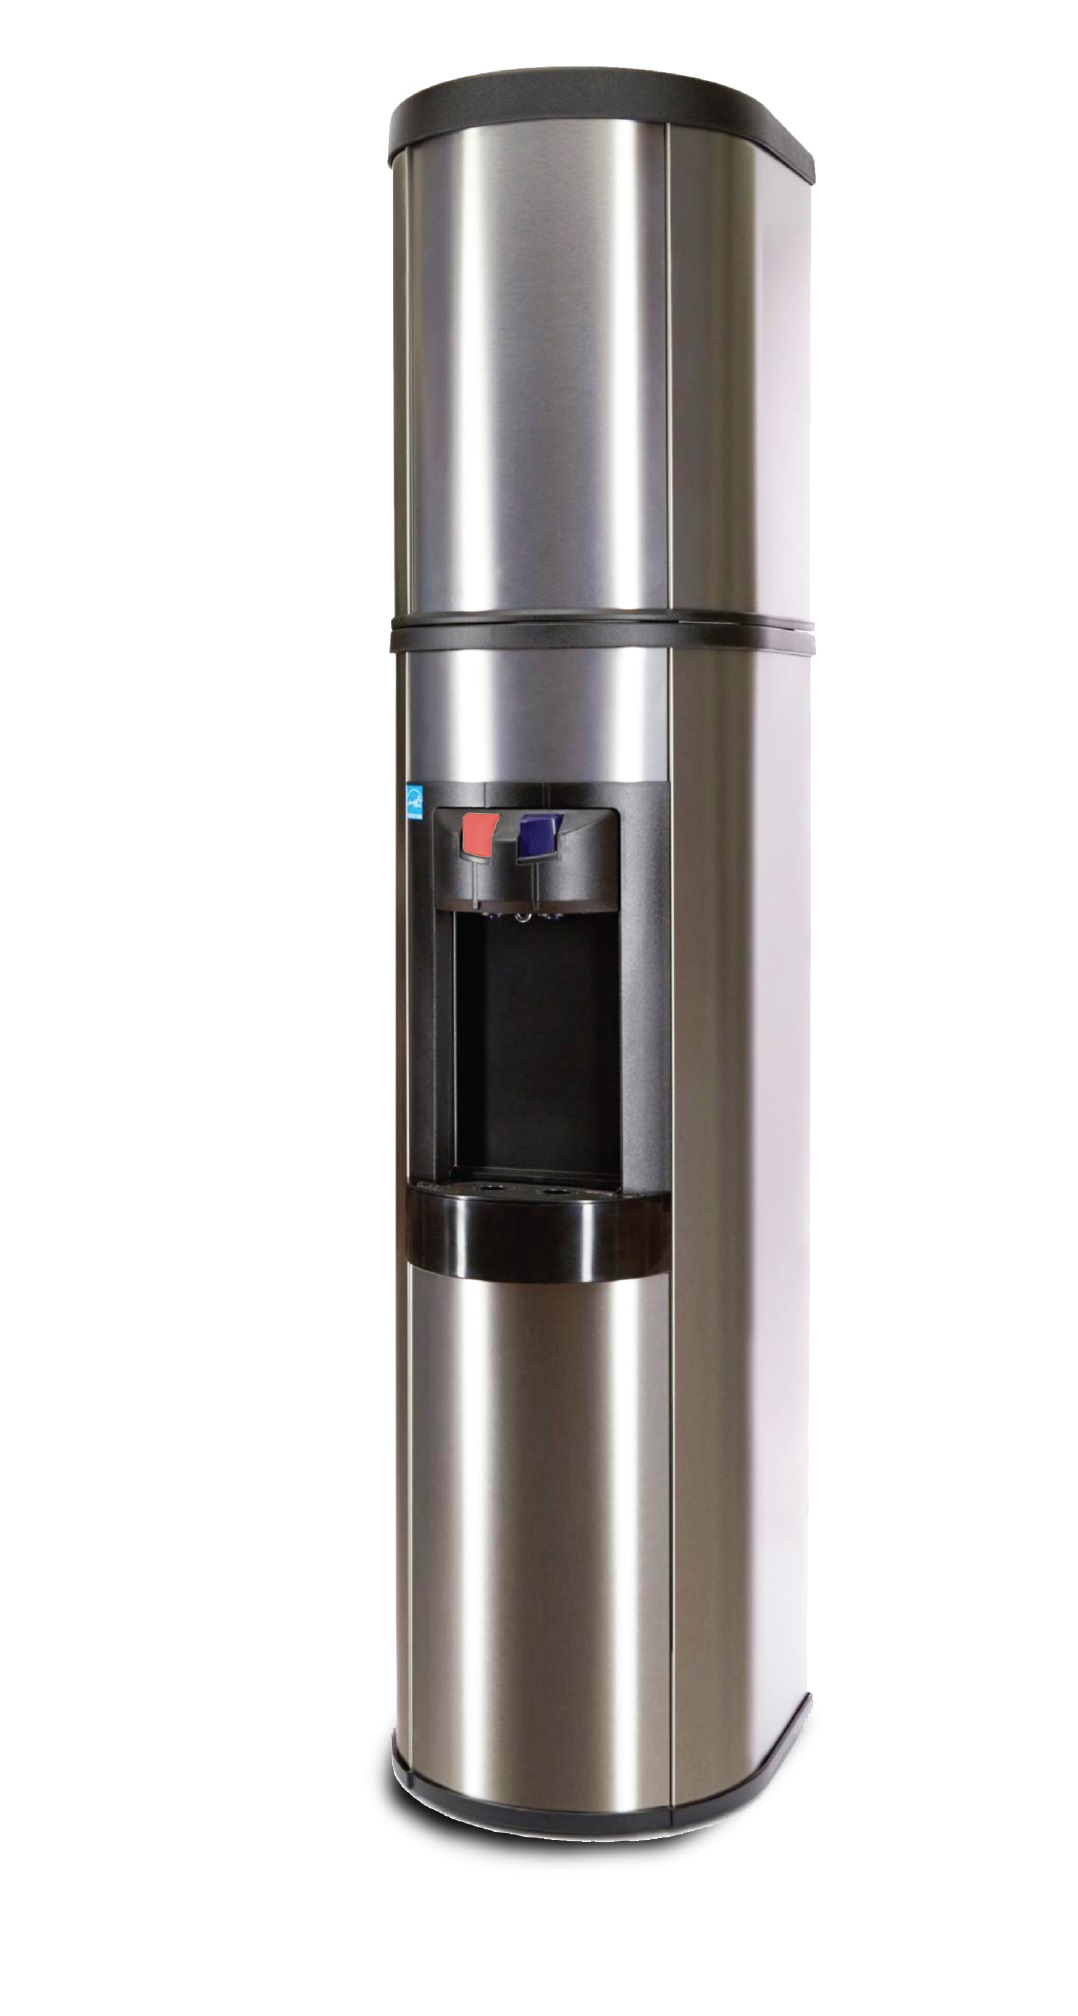 Absolu Water Cooler - Stainless Steel with Black Trim - Our Latest Innovation! Hot & Cold